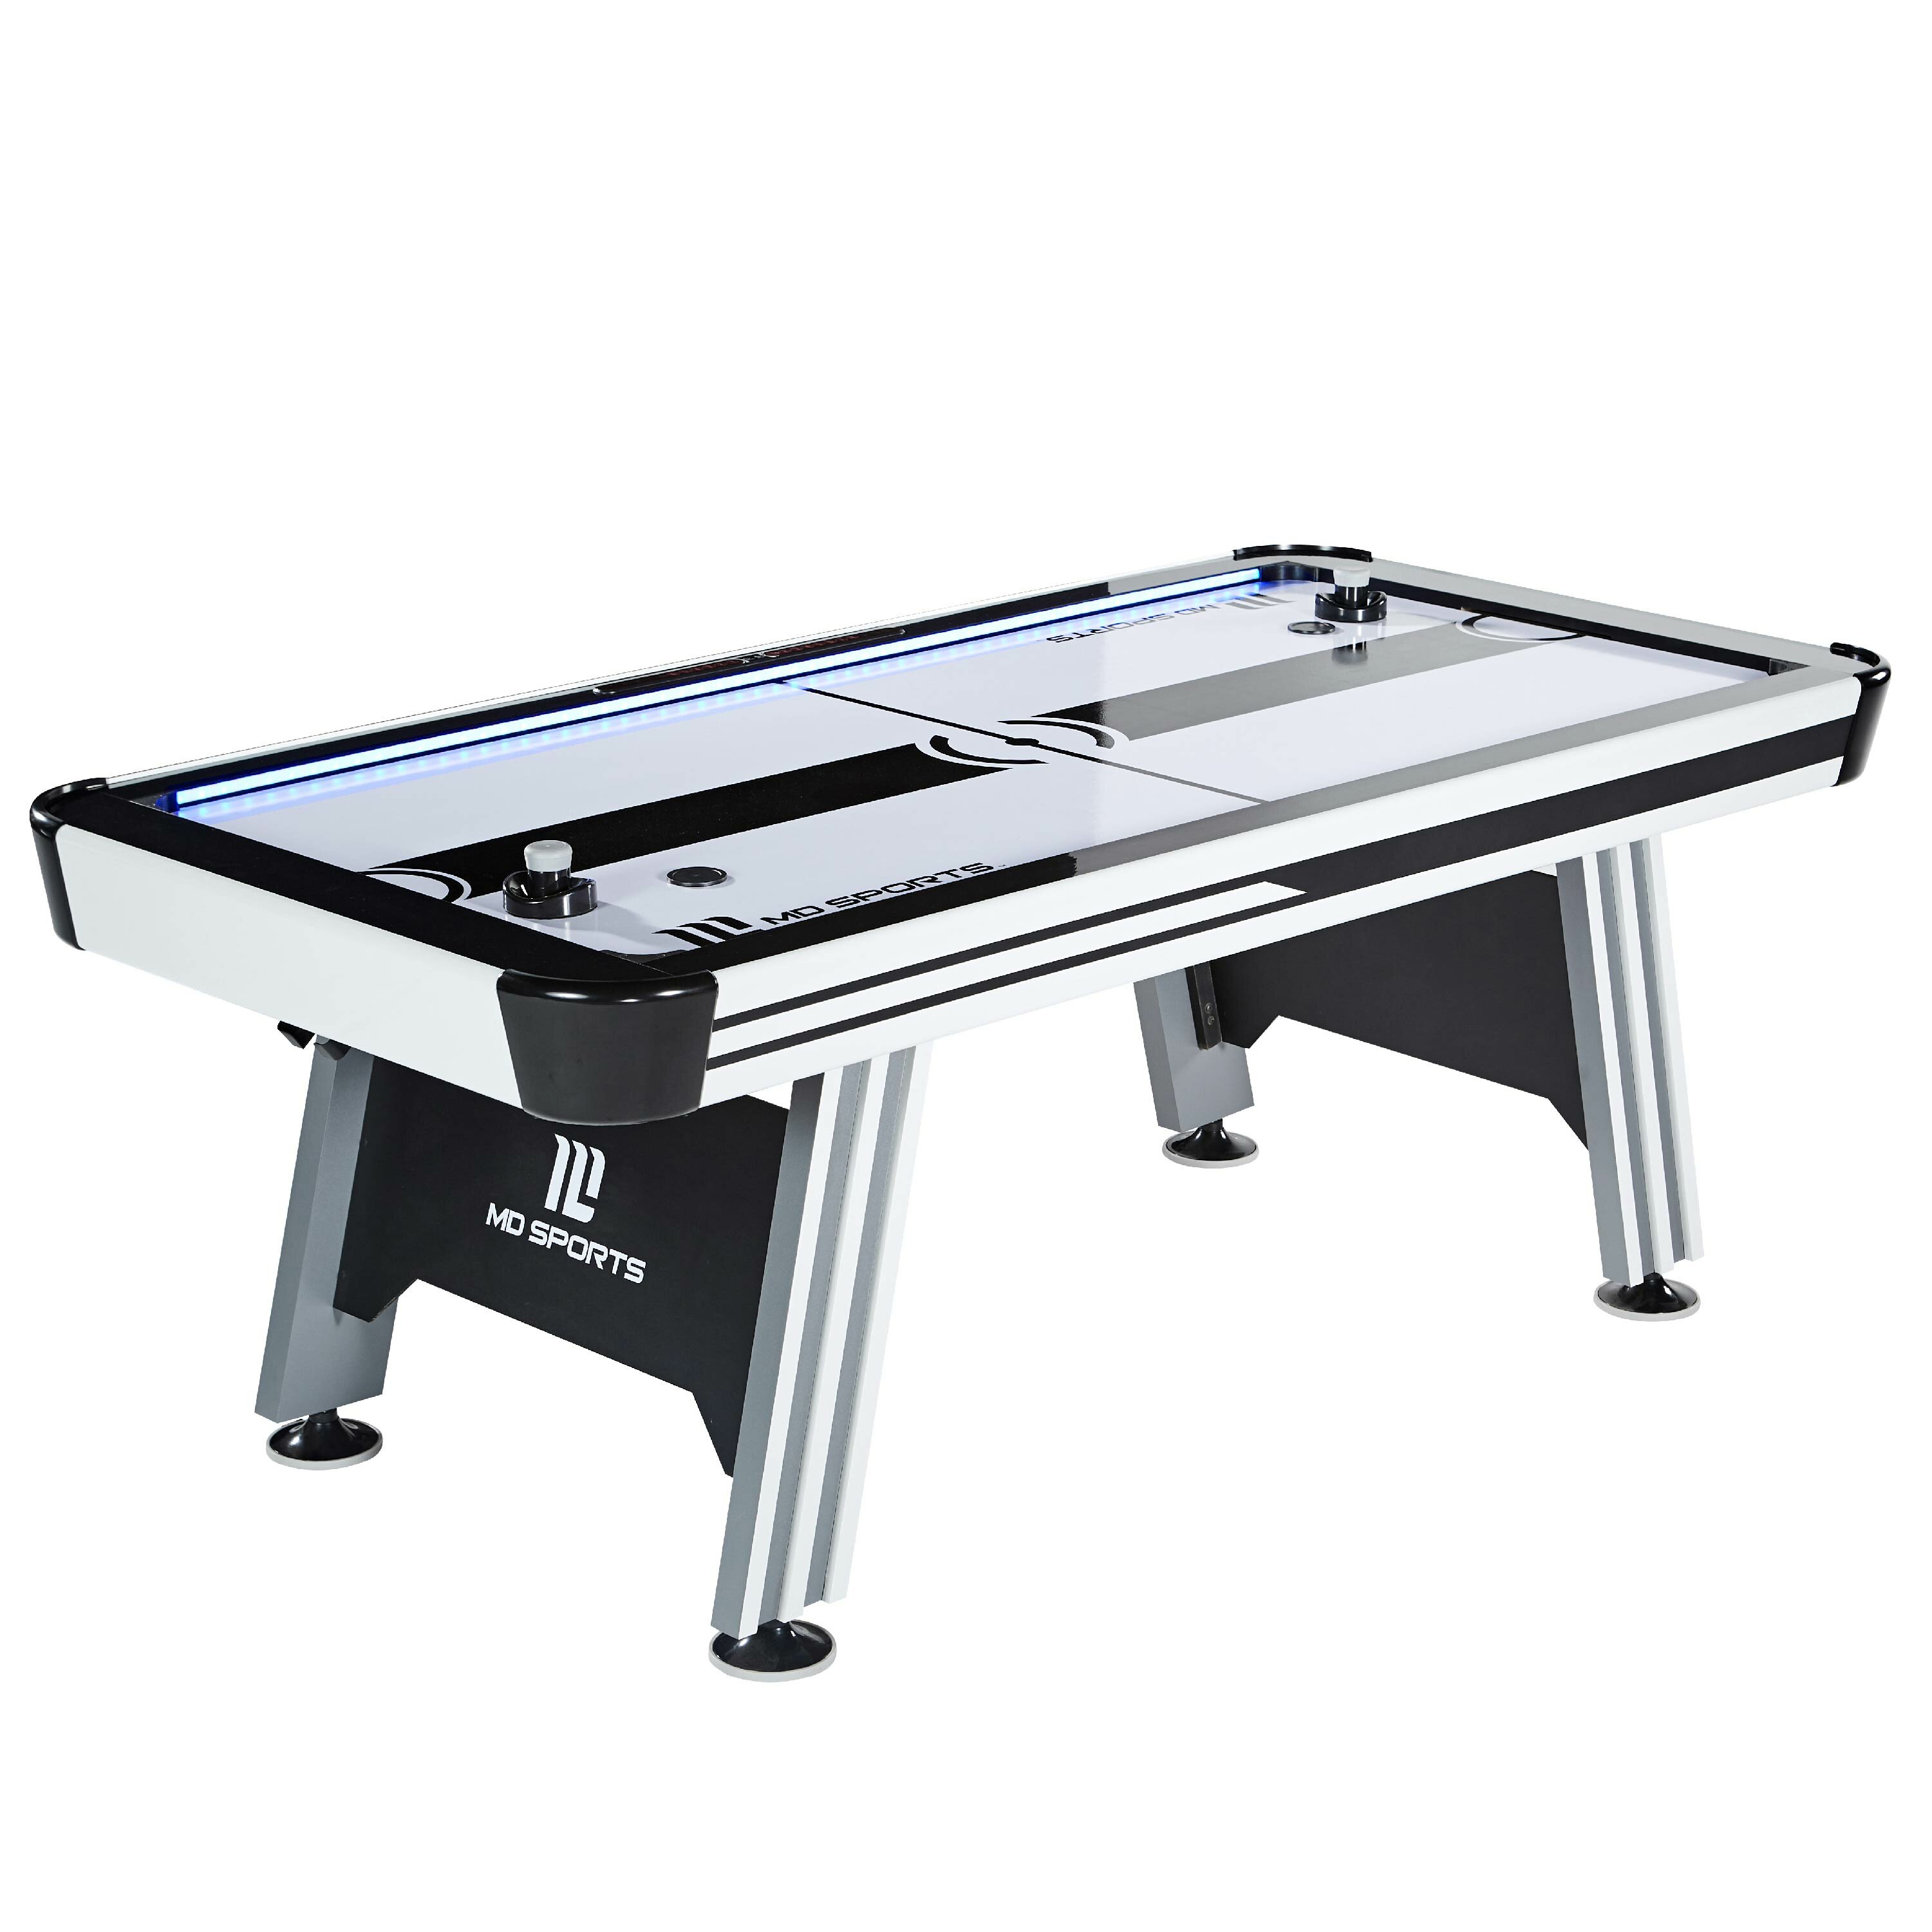 Md Sports 84 2 Player Air Hockey Table With Digital Scoreboard 